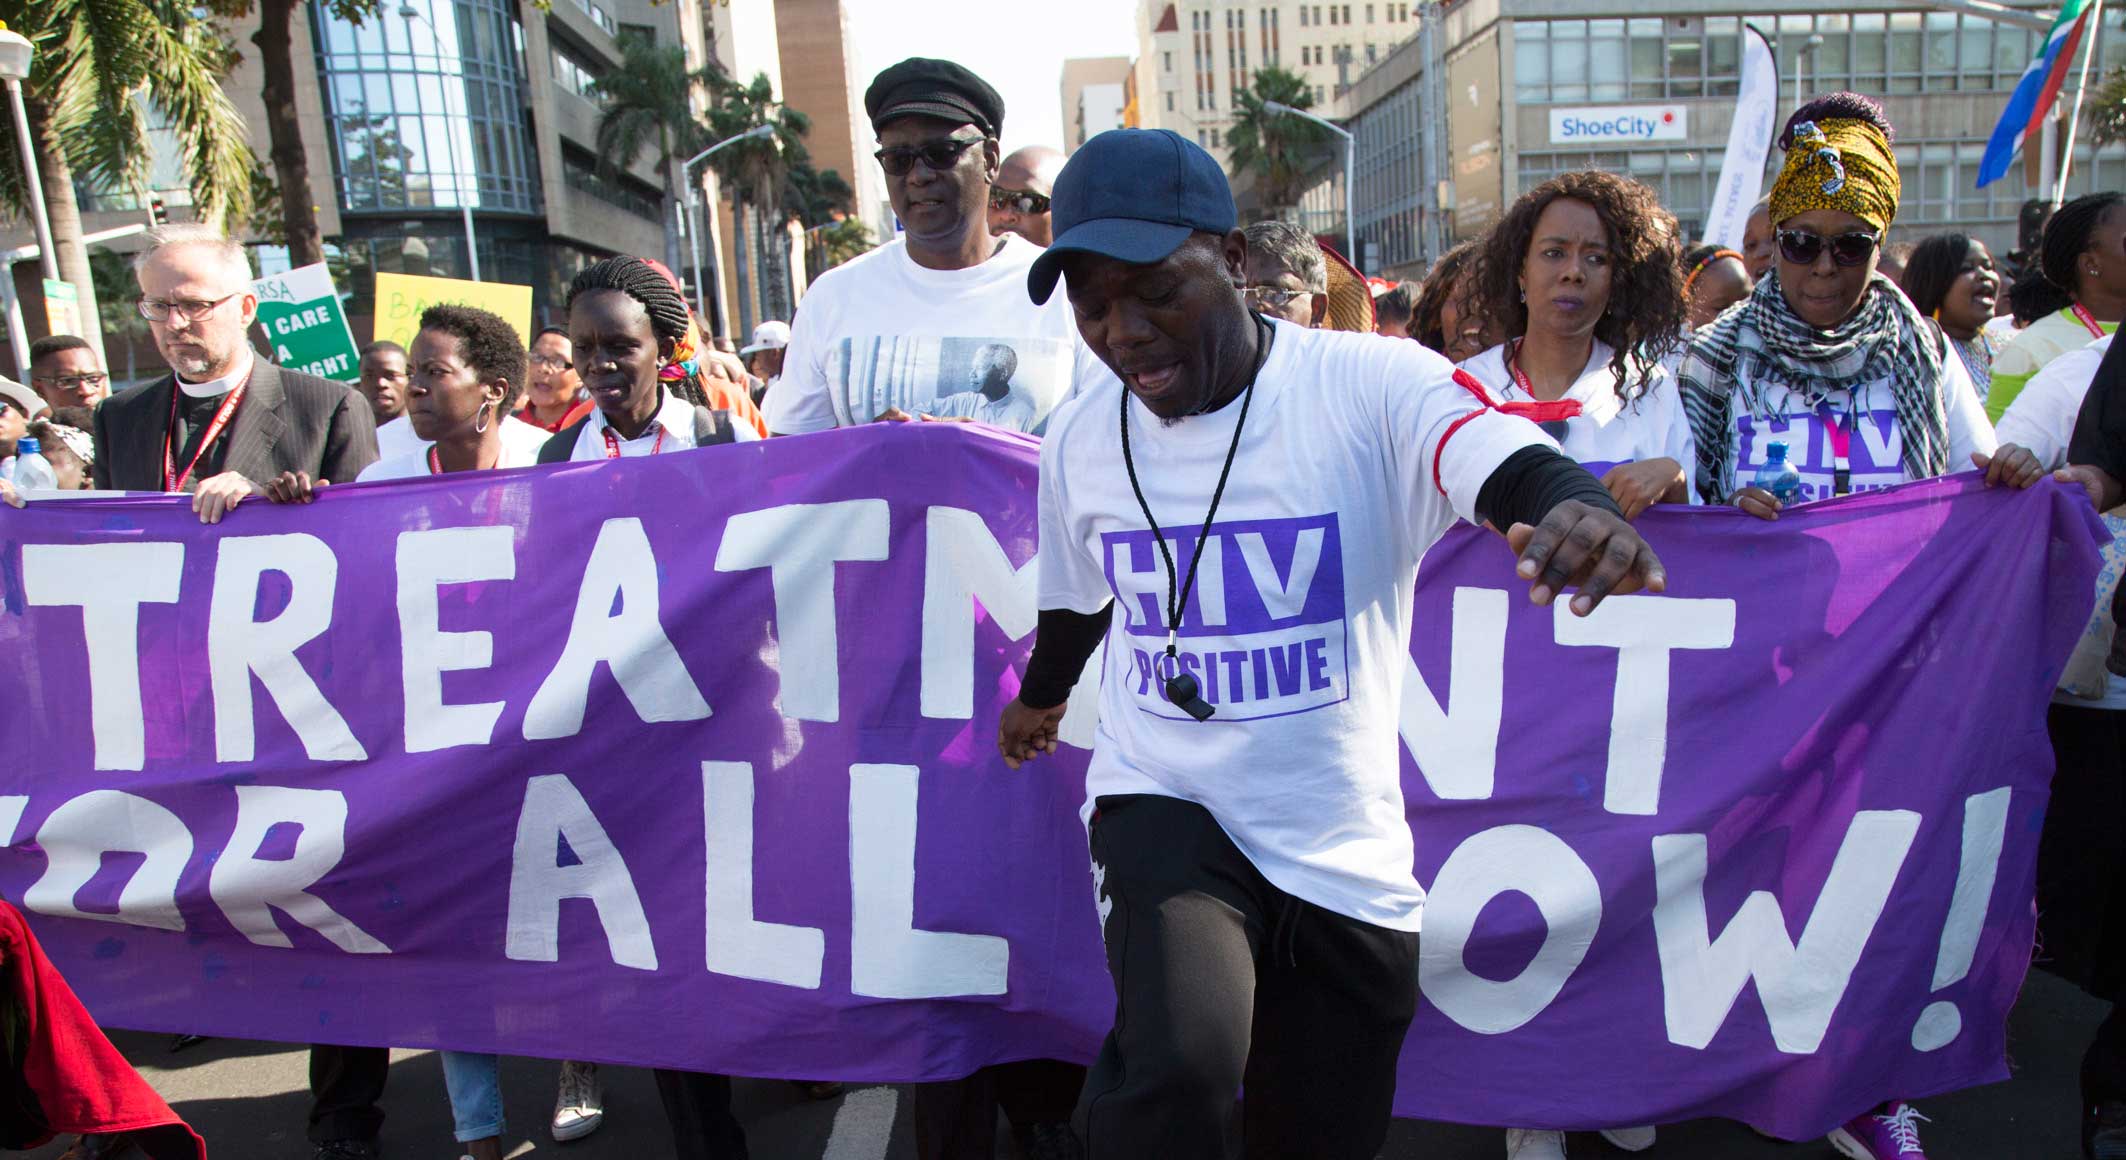 21st International AIDS Conference (AIDS 2016), Durban, South Africa.<br />
Photo shows TAC March through the Durban CBD, 18 July, 2016.<br />
Photo©International AIDS Society/Rogan Ward)